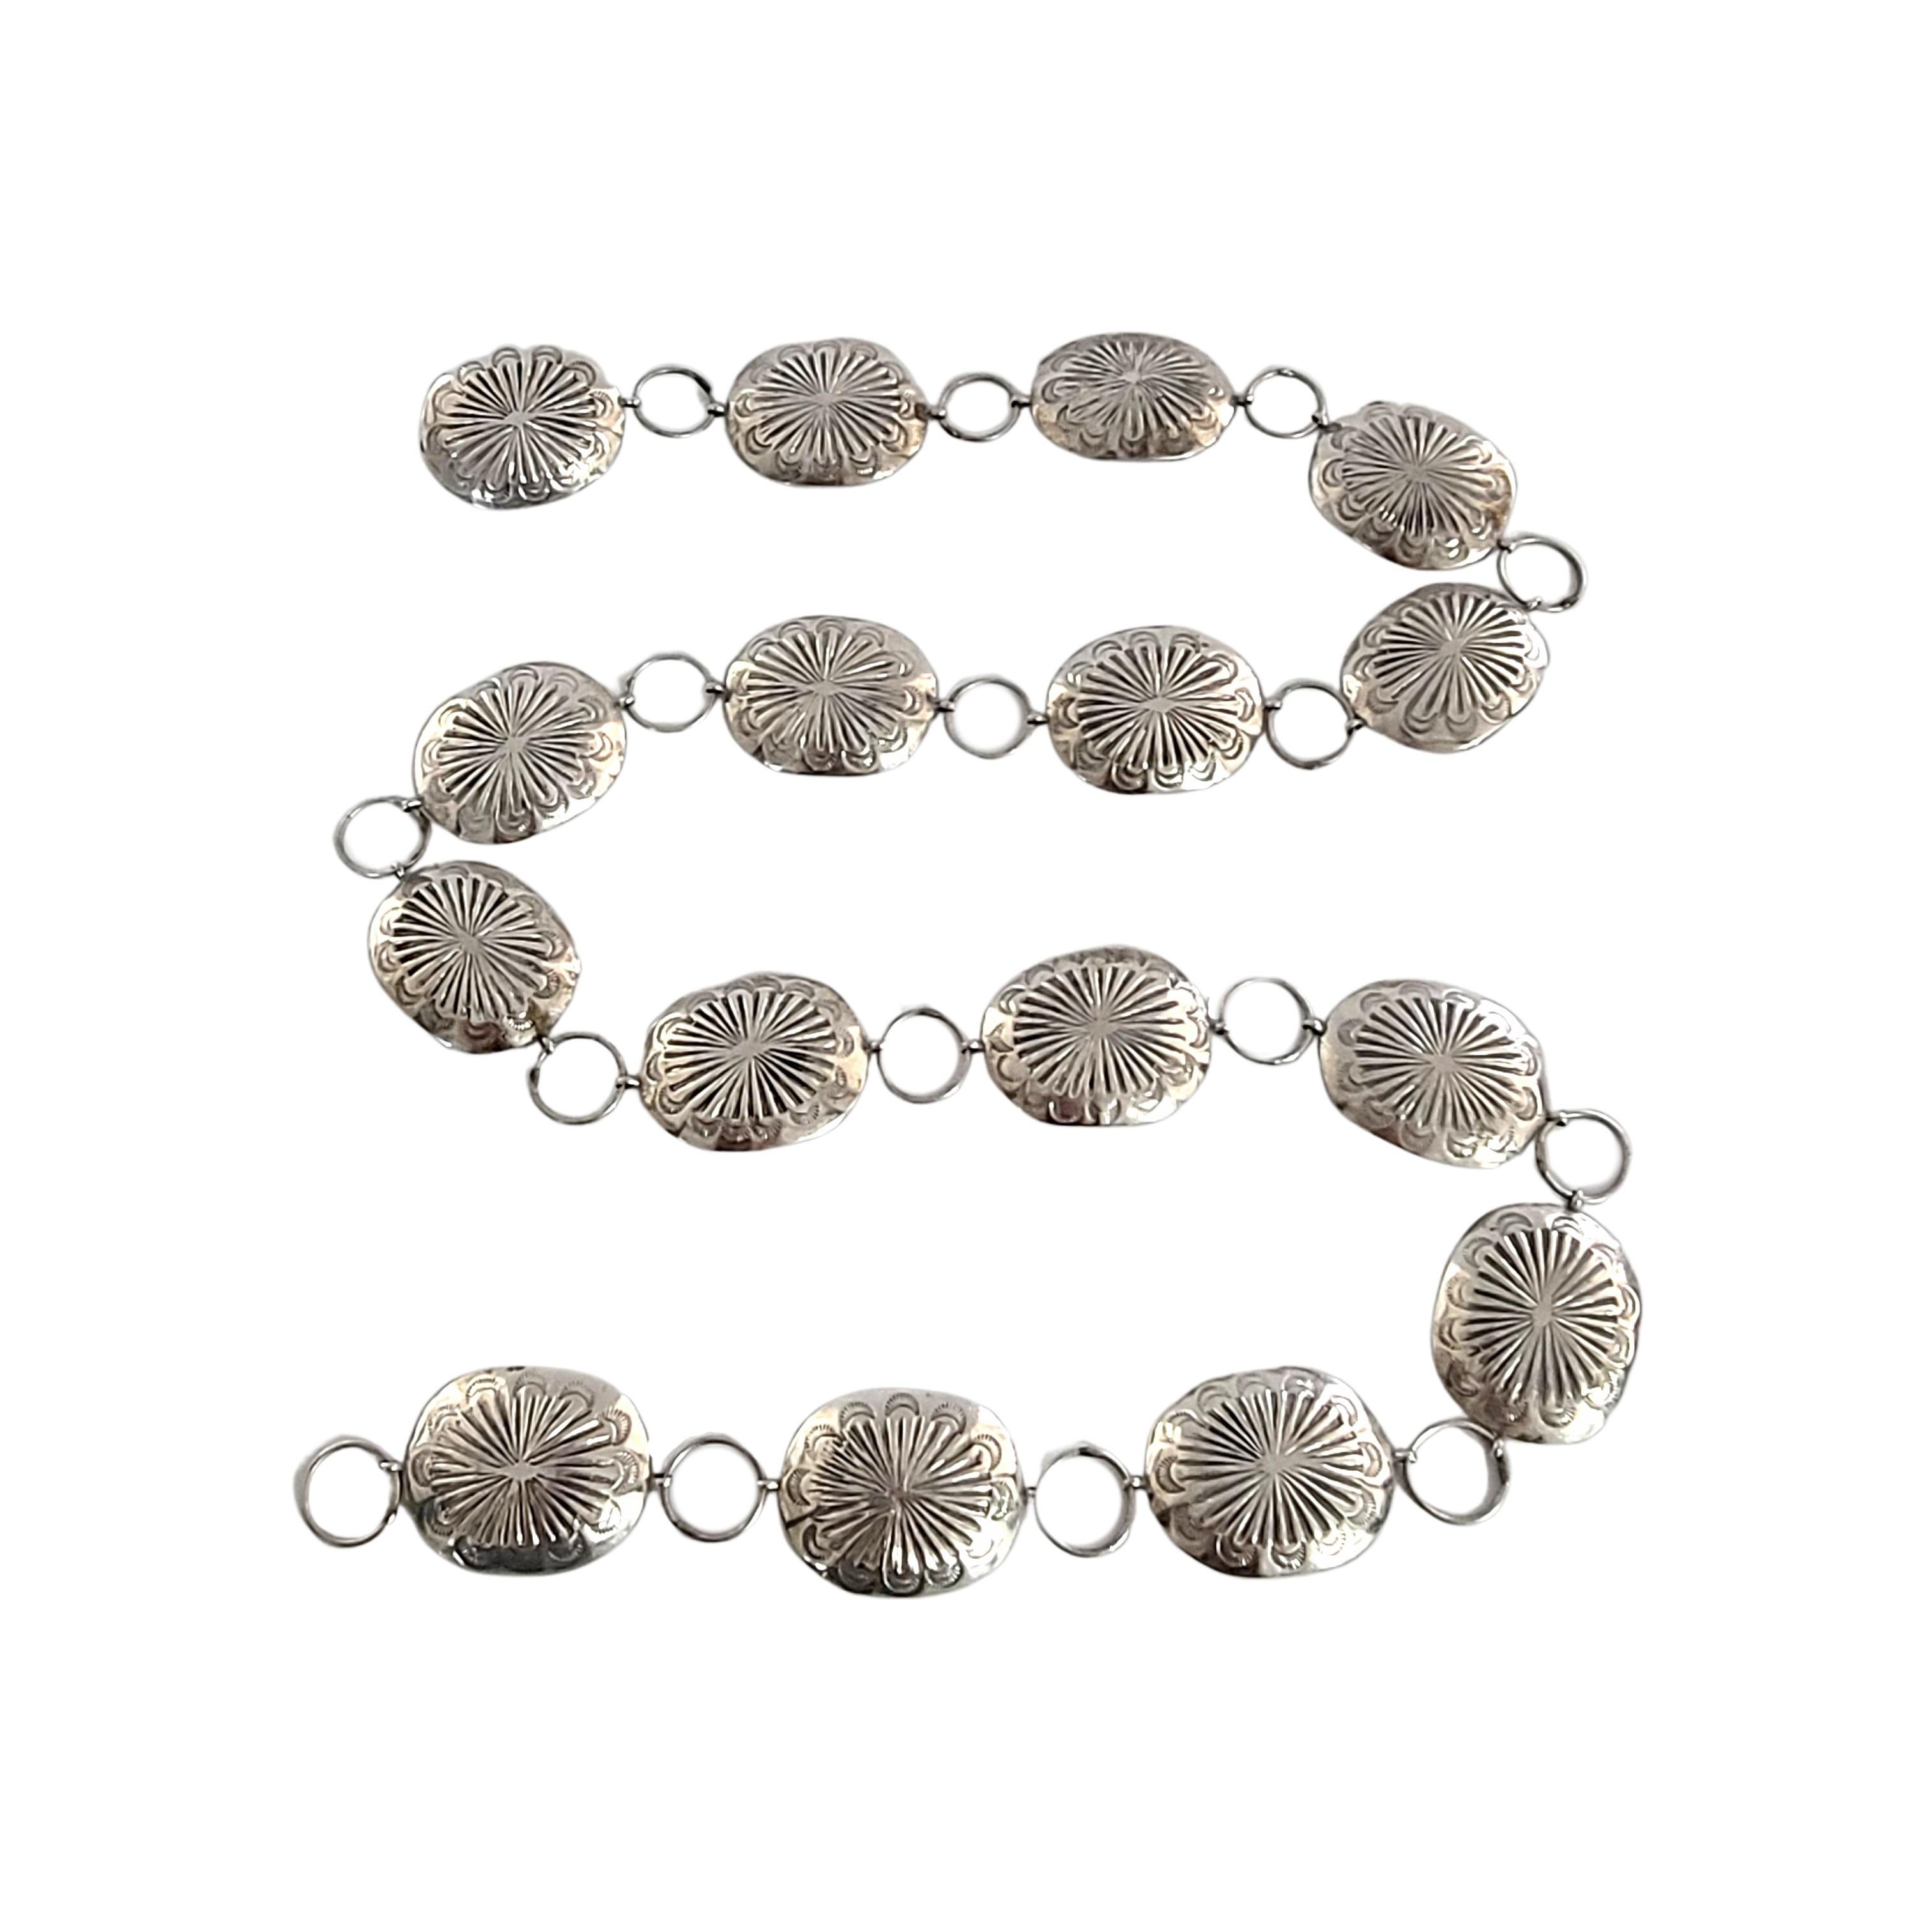 Vintage silver concho belt chain.

This belt chain is a beautiful example of Native American artisan craftsmanship, featuring stamped design on 16 conchos alternating with round links.

Measures approx 37